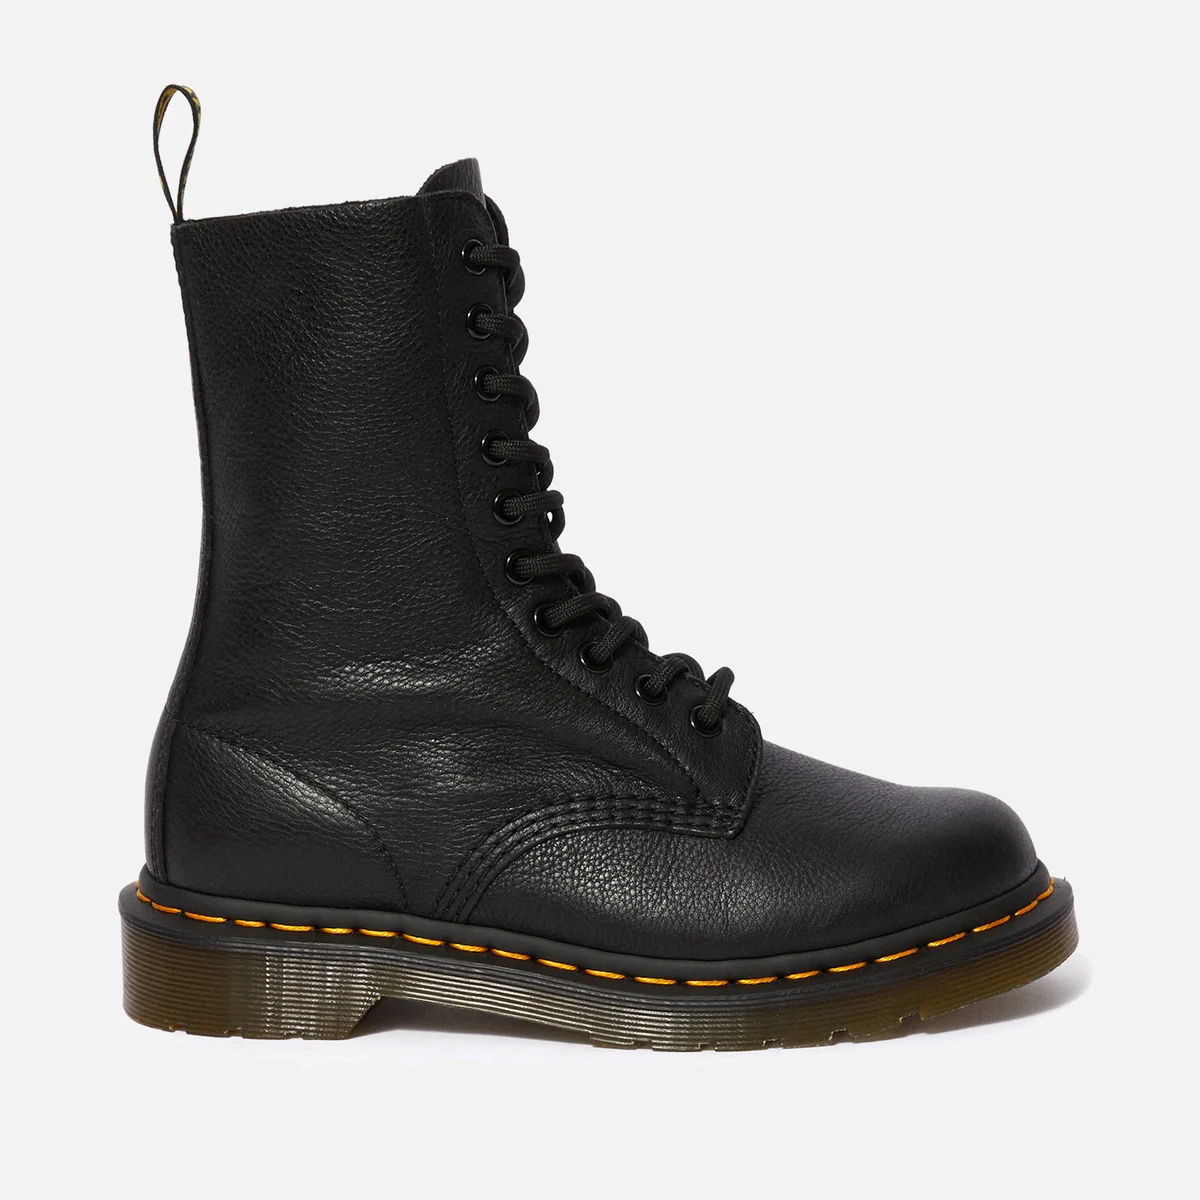 Dr. Martens Women's 1490 Virginia Leather 10-Eye Boots - Black Image 1